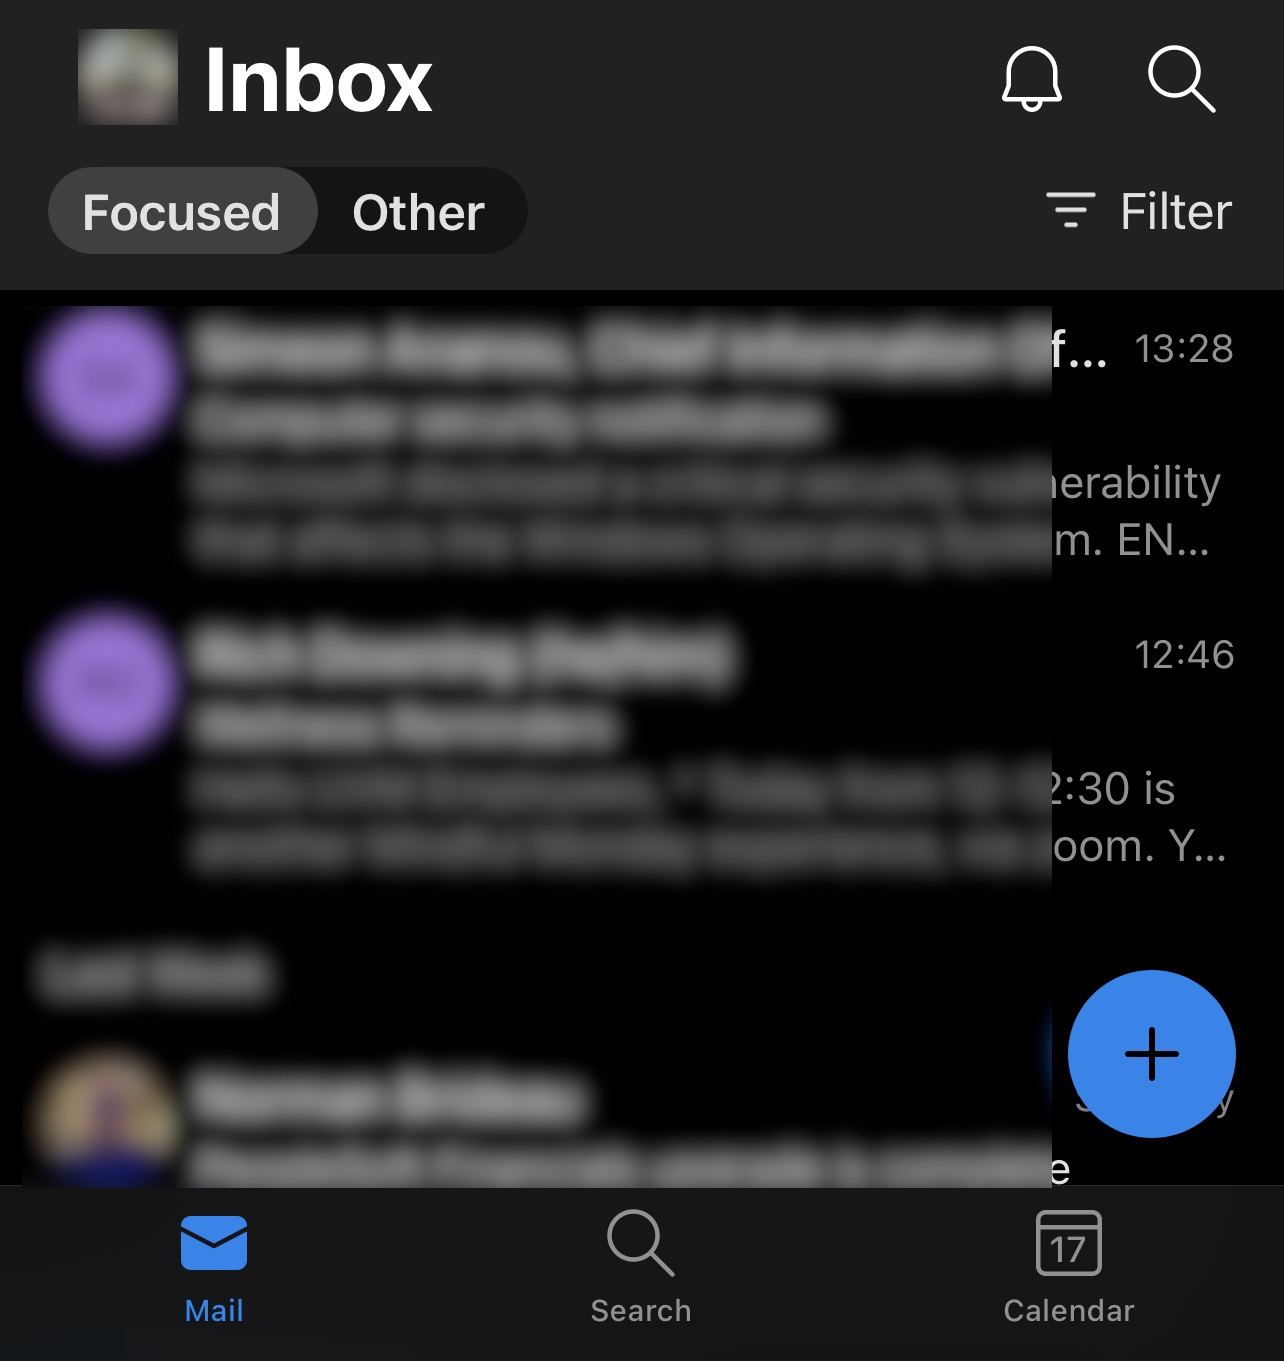 Outlook for iOS Inbox example